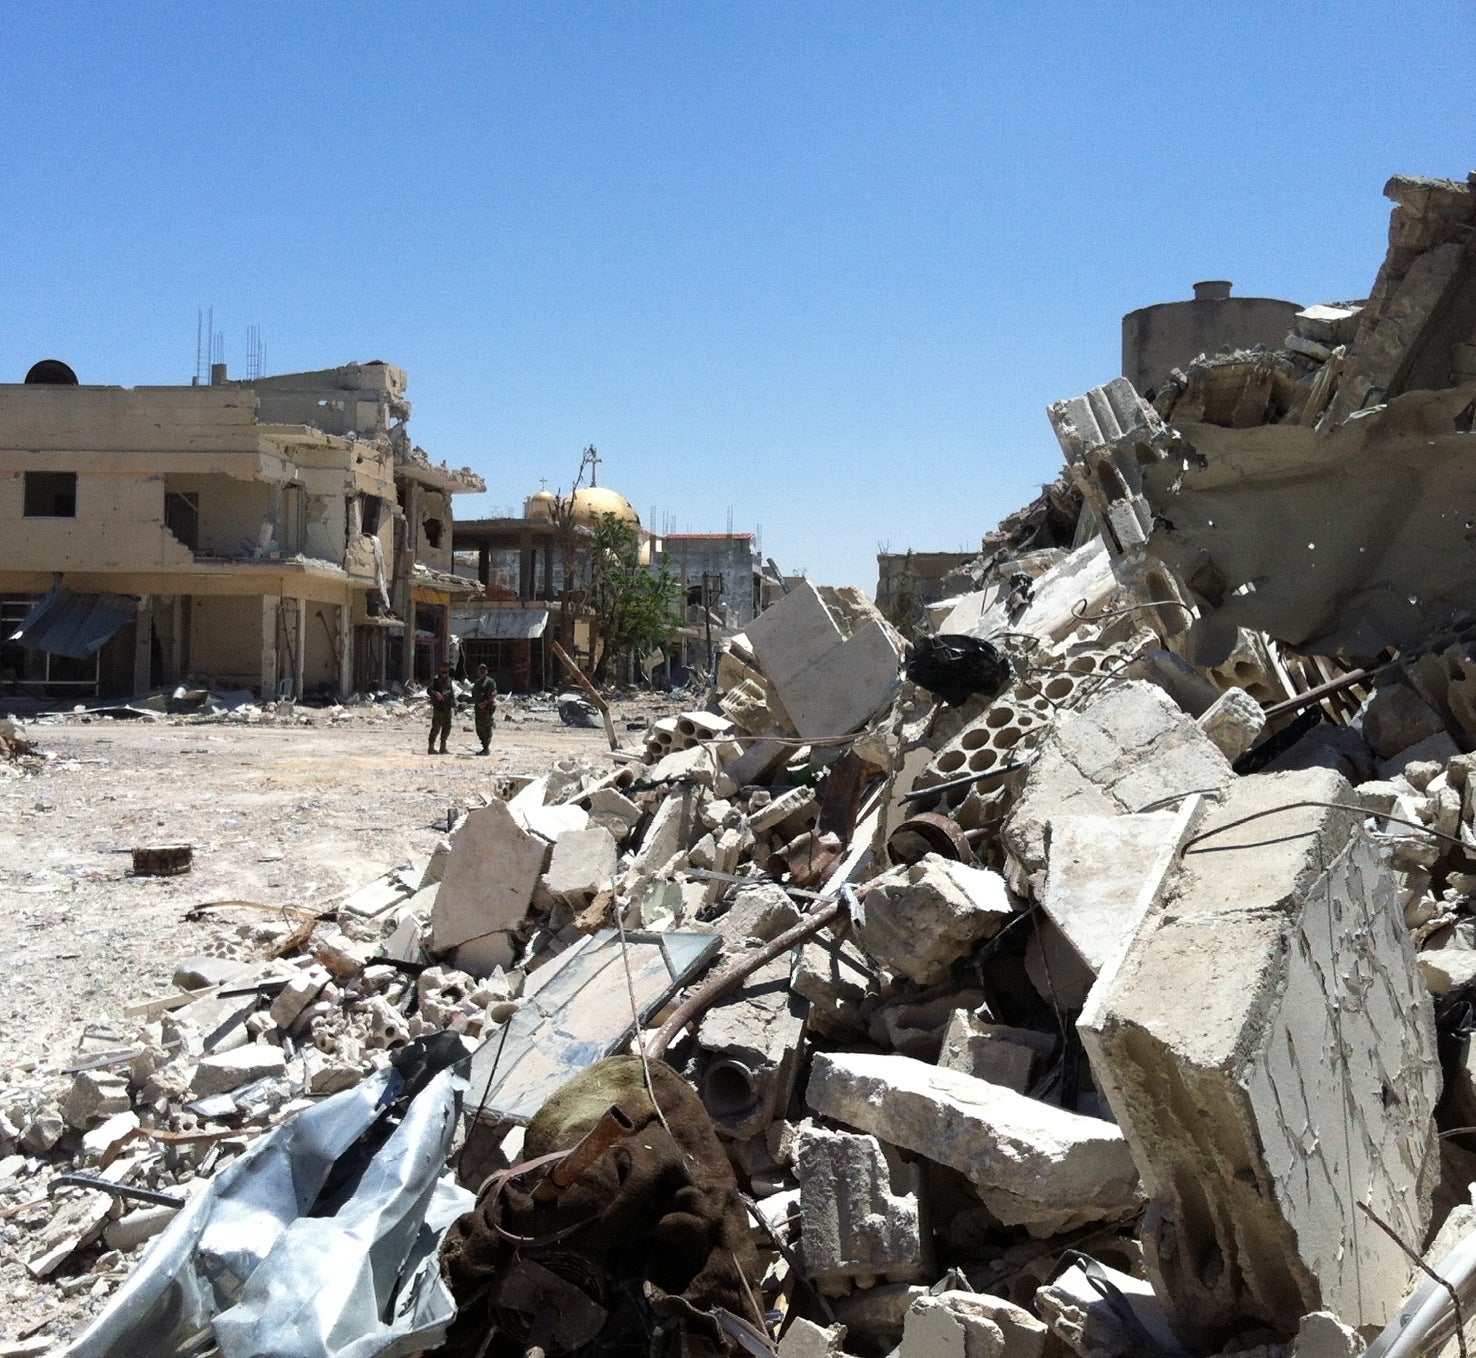 The conflict has devastated large parts of the infrastructure in the Homs region